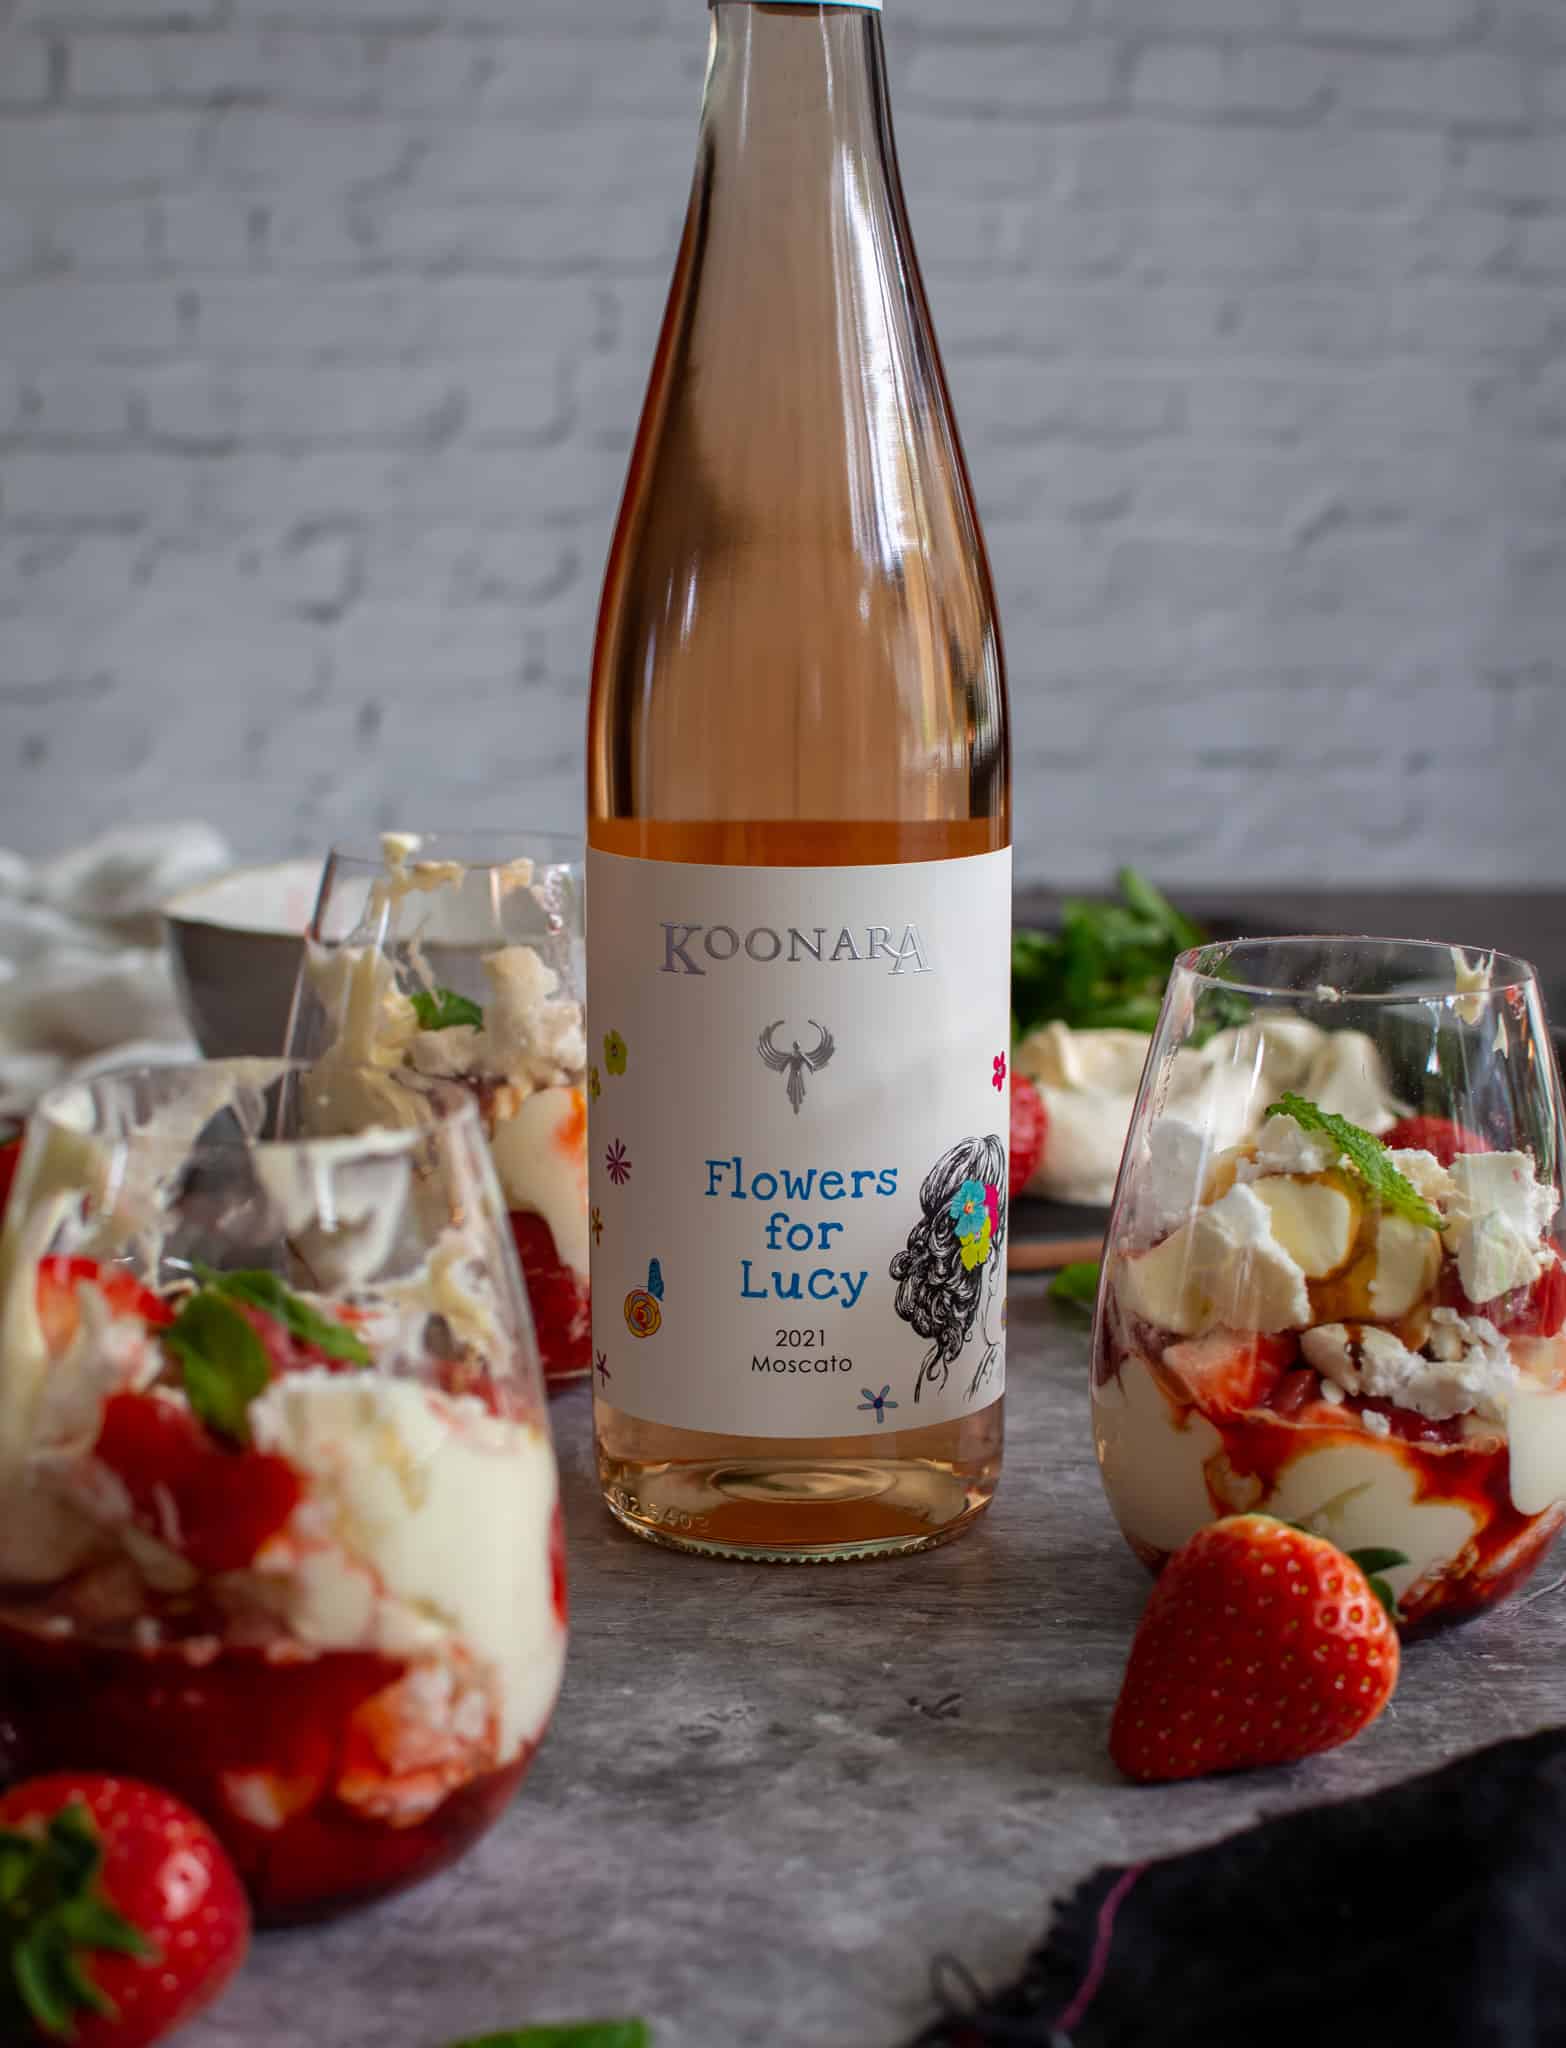 A bottle of Koonara Flowers for Lucy Mostaco with glasses of Eton Mess beside it